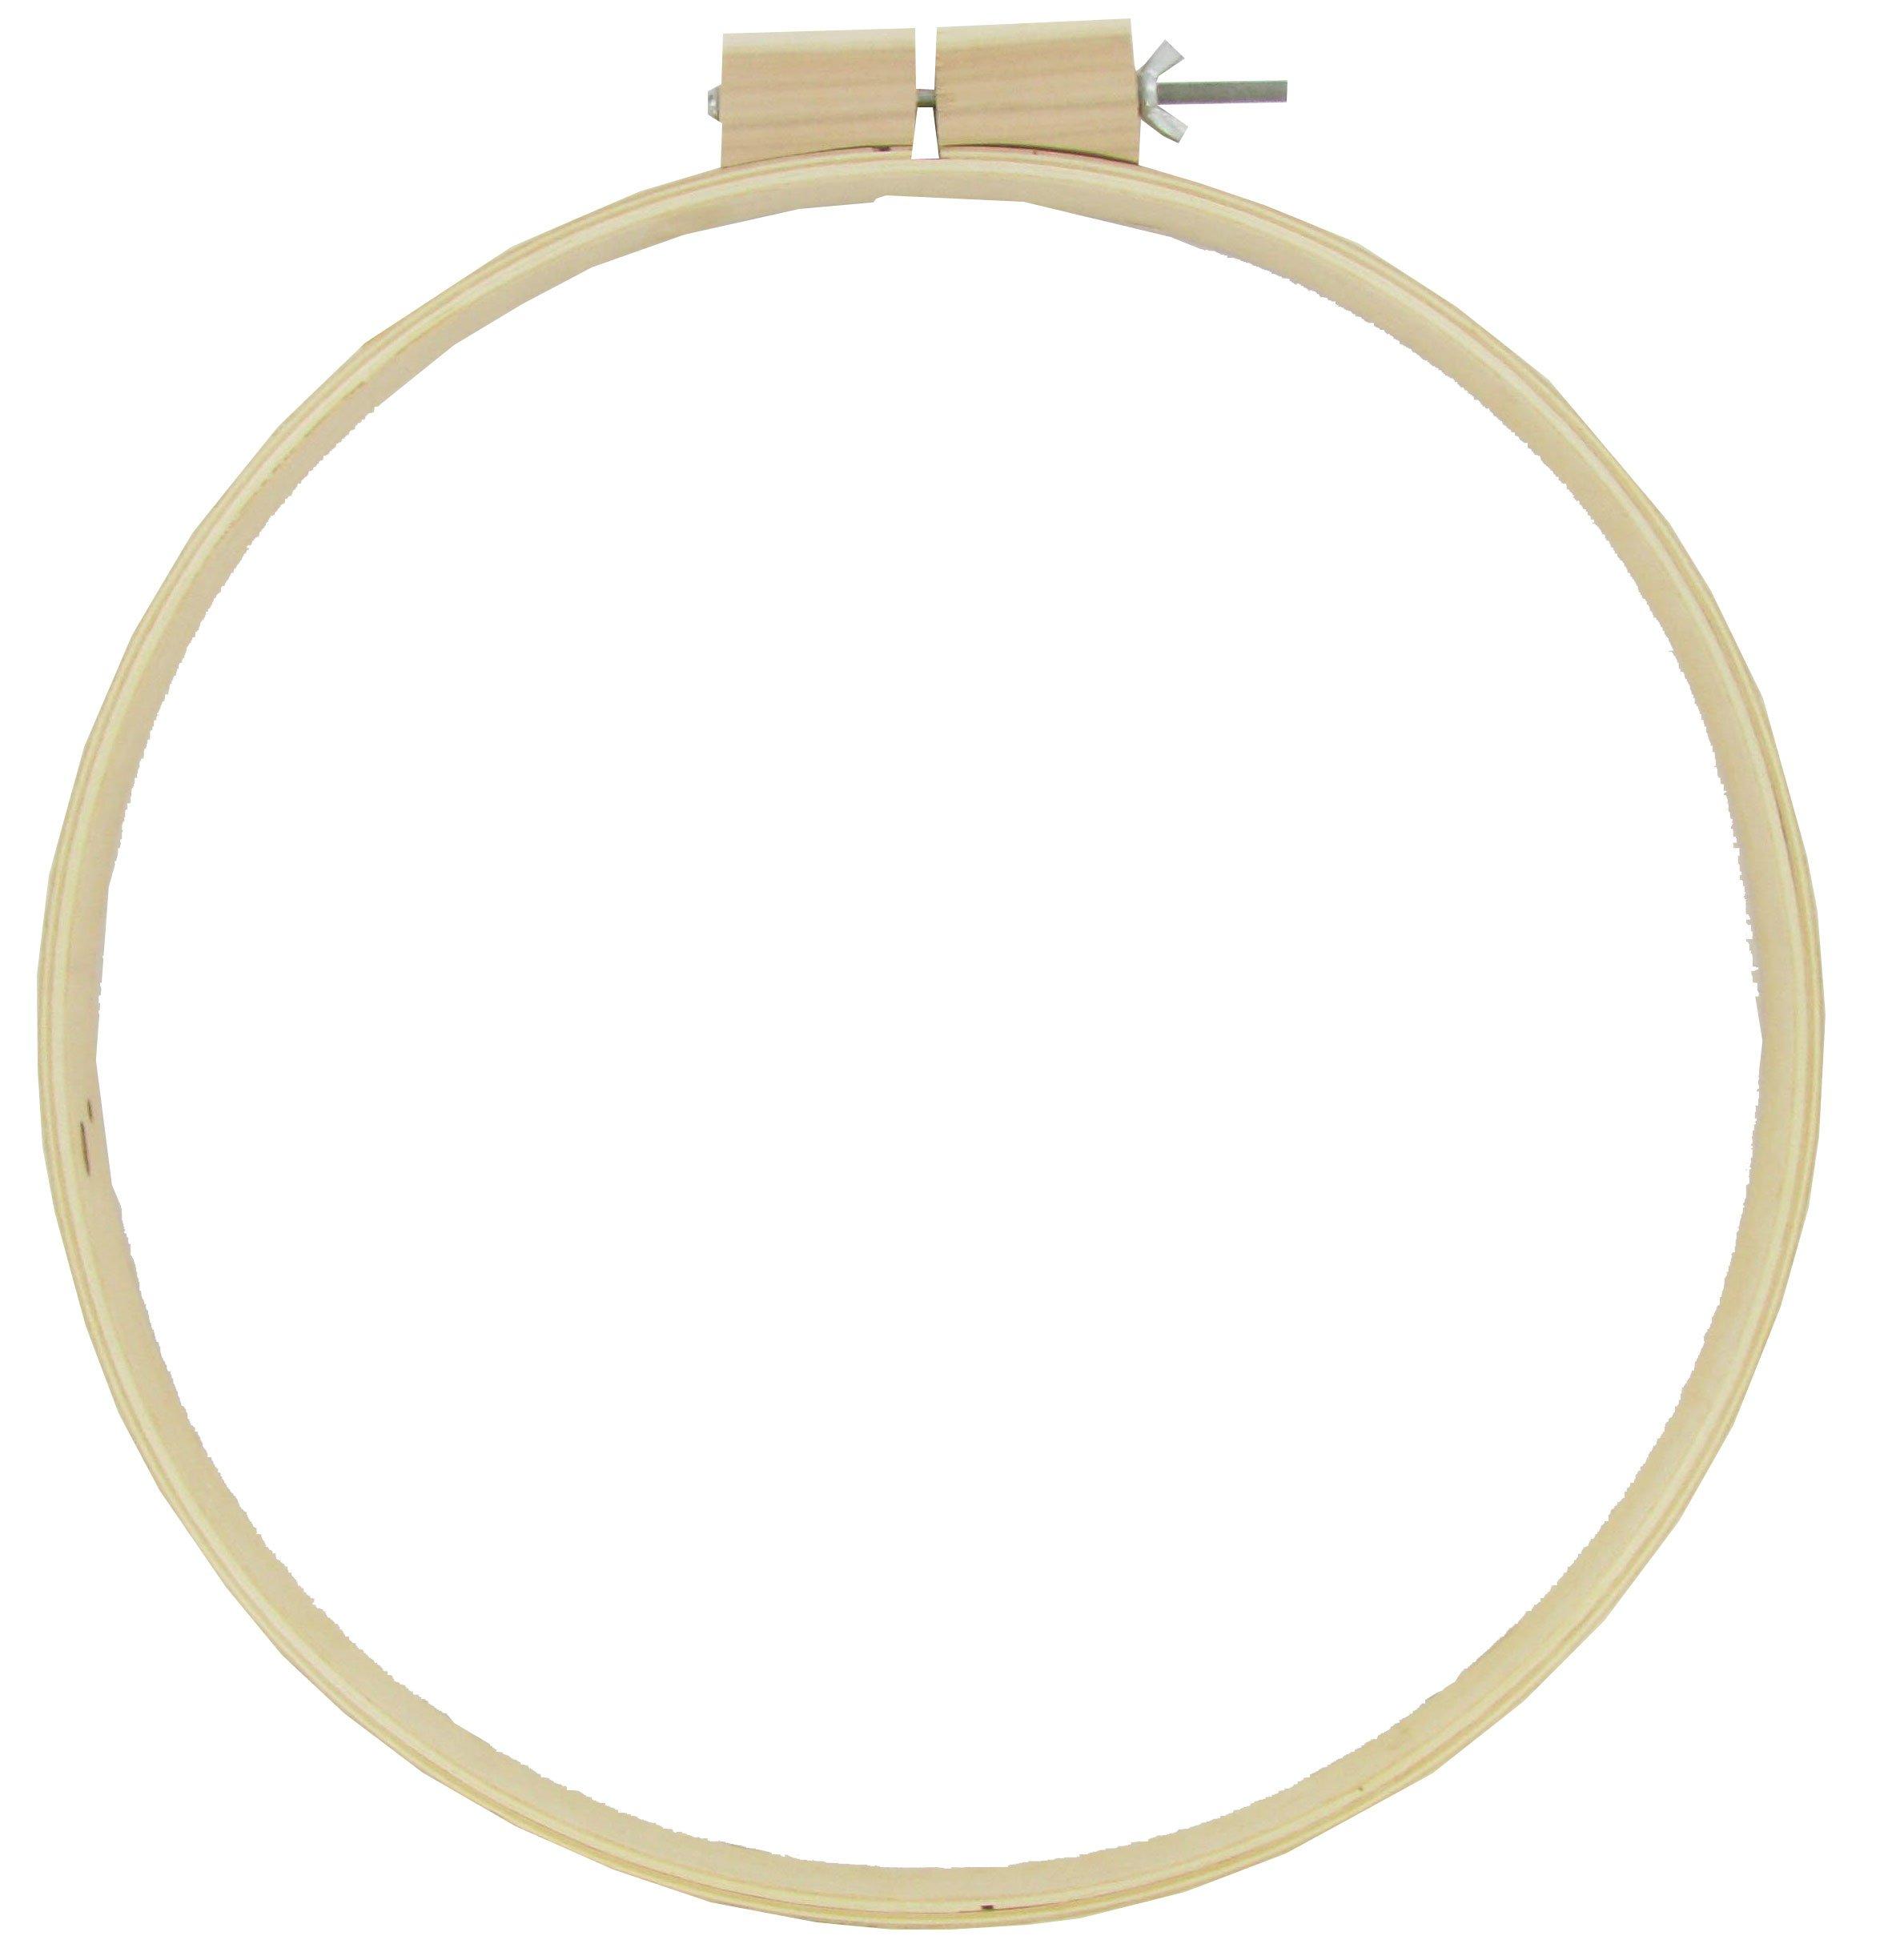 18 x 24 cm oval wooden embroidery hoop | Premium quality